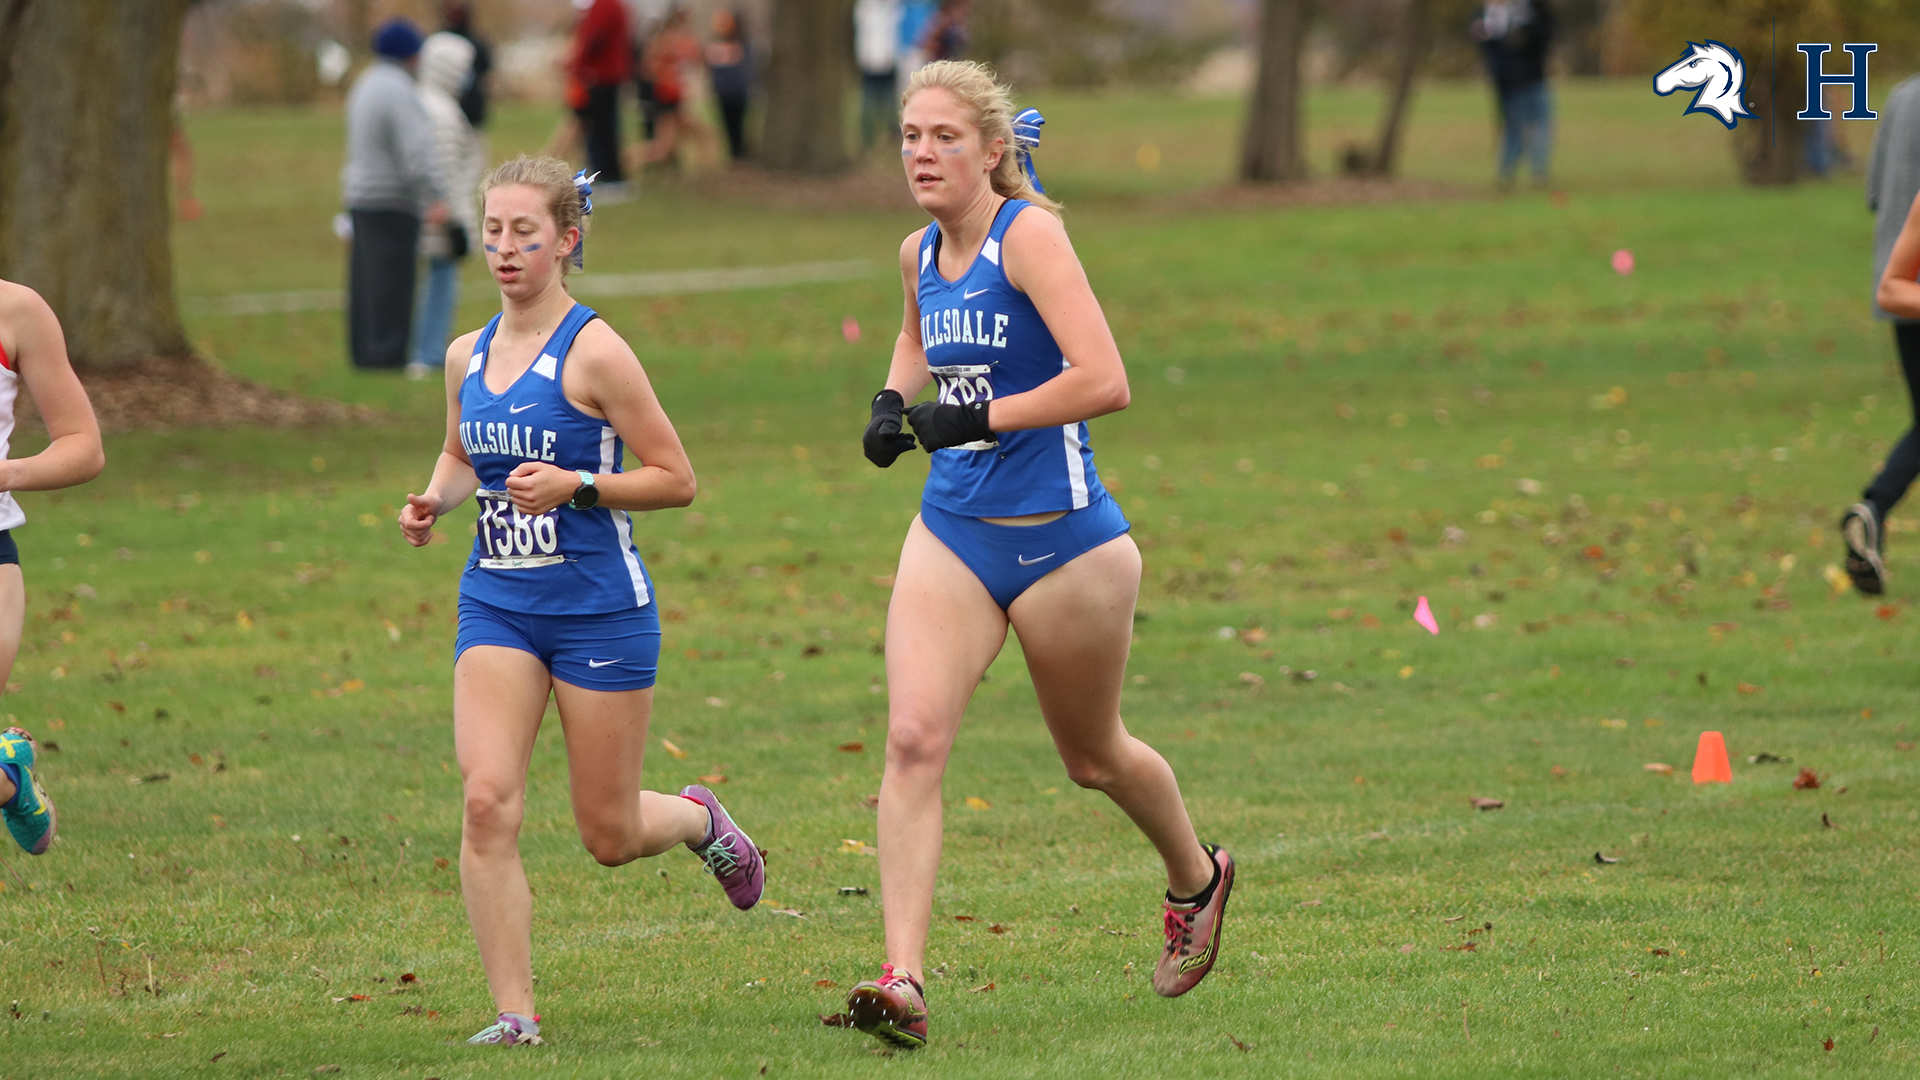 Charger women step up for runner-up finish at Lucian Rosa Invite